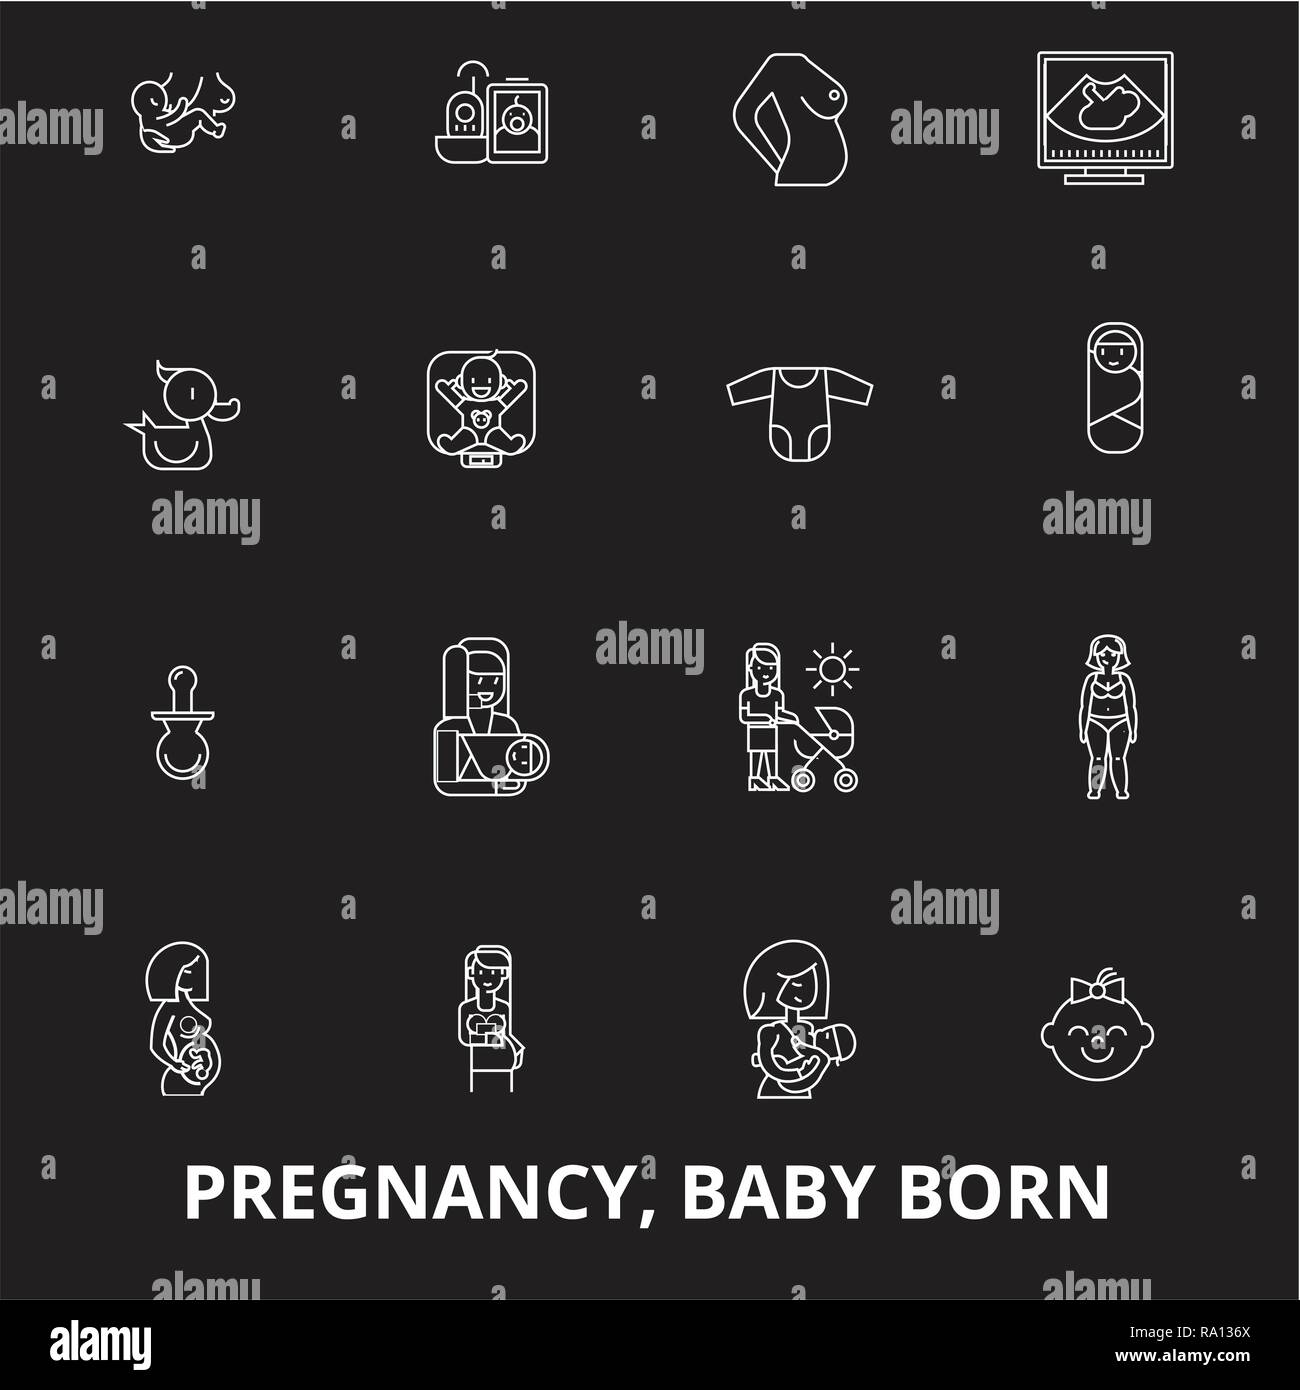 Pregnancy icons editable line icons vector set on black background. Pregnancy icons white outline illustrations, signs, symbols Stock Vector